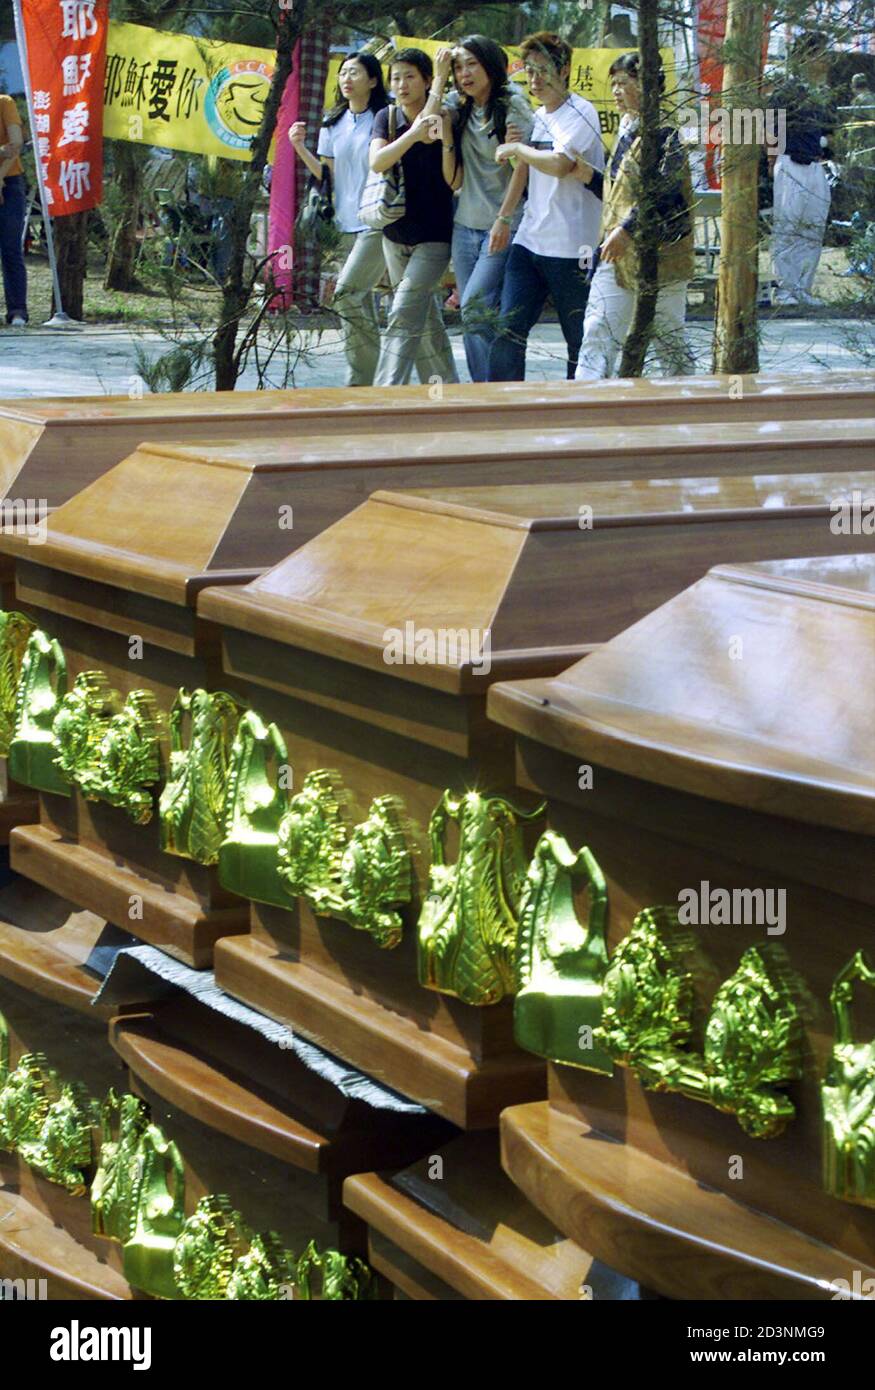 Relatives of passengers aboard China Airlines flight CI 611 that crashed into the ocean en route to Hong Kong from Taiwan cry beside stacks of coffins at a stadium on the island of Penghu May 27, 2002. Taiwan officials were investigating on Sunday why a China Airlines plane broke into four pieces and plunged into the sea, killing all 225 people on board, in Asia's third major air crash in six weeks. REUTERS/Kenny Wu  KW Stock Photo